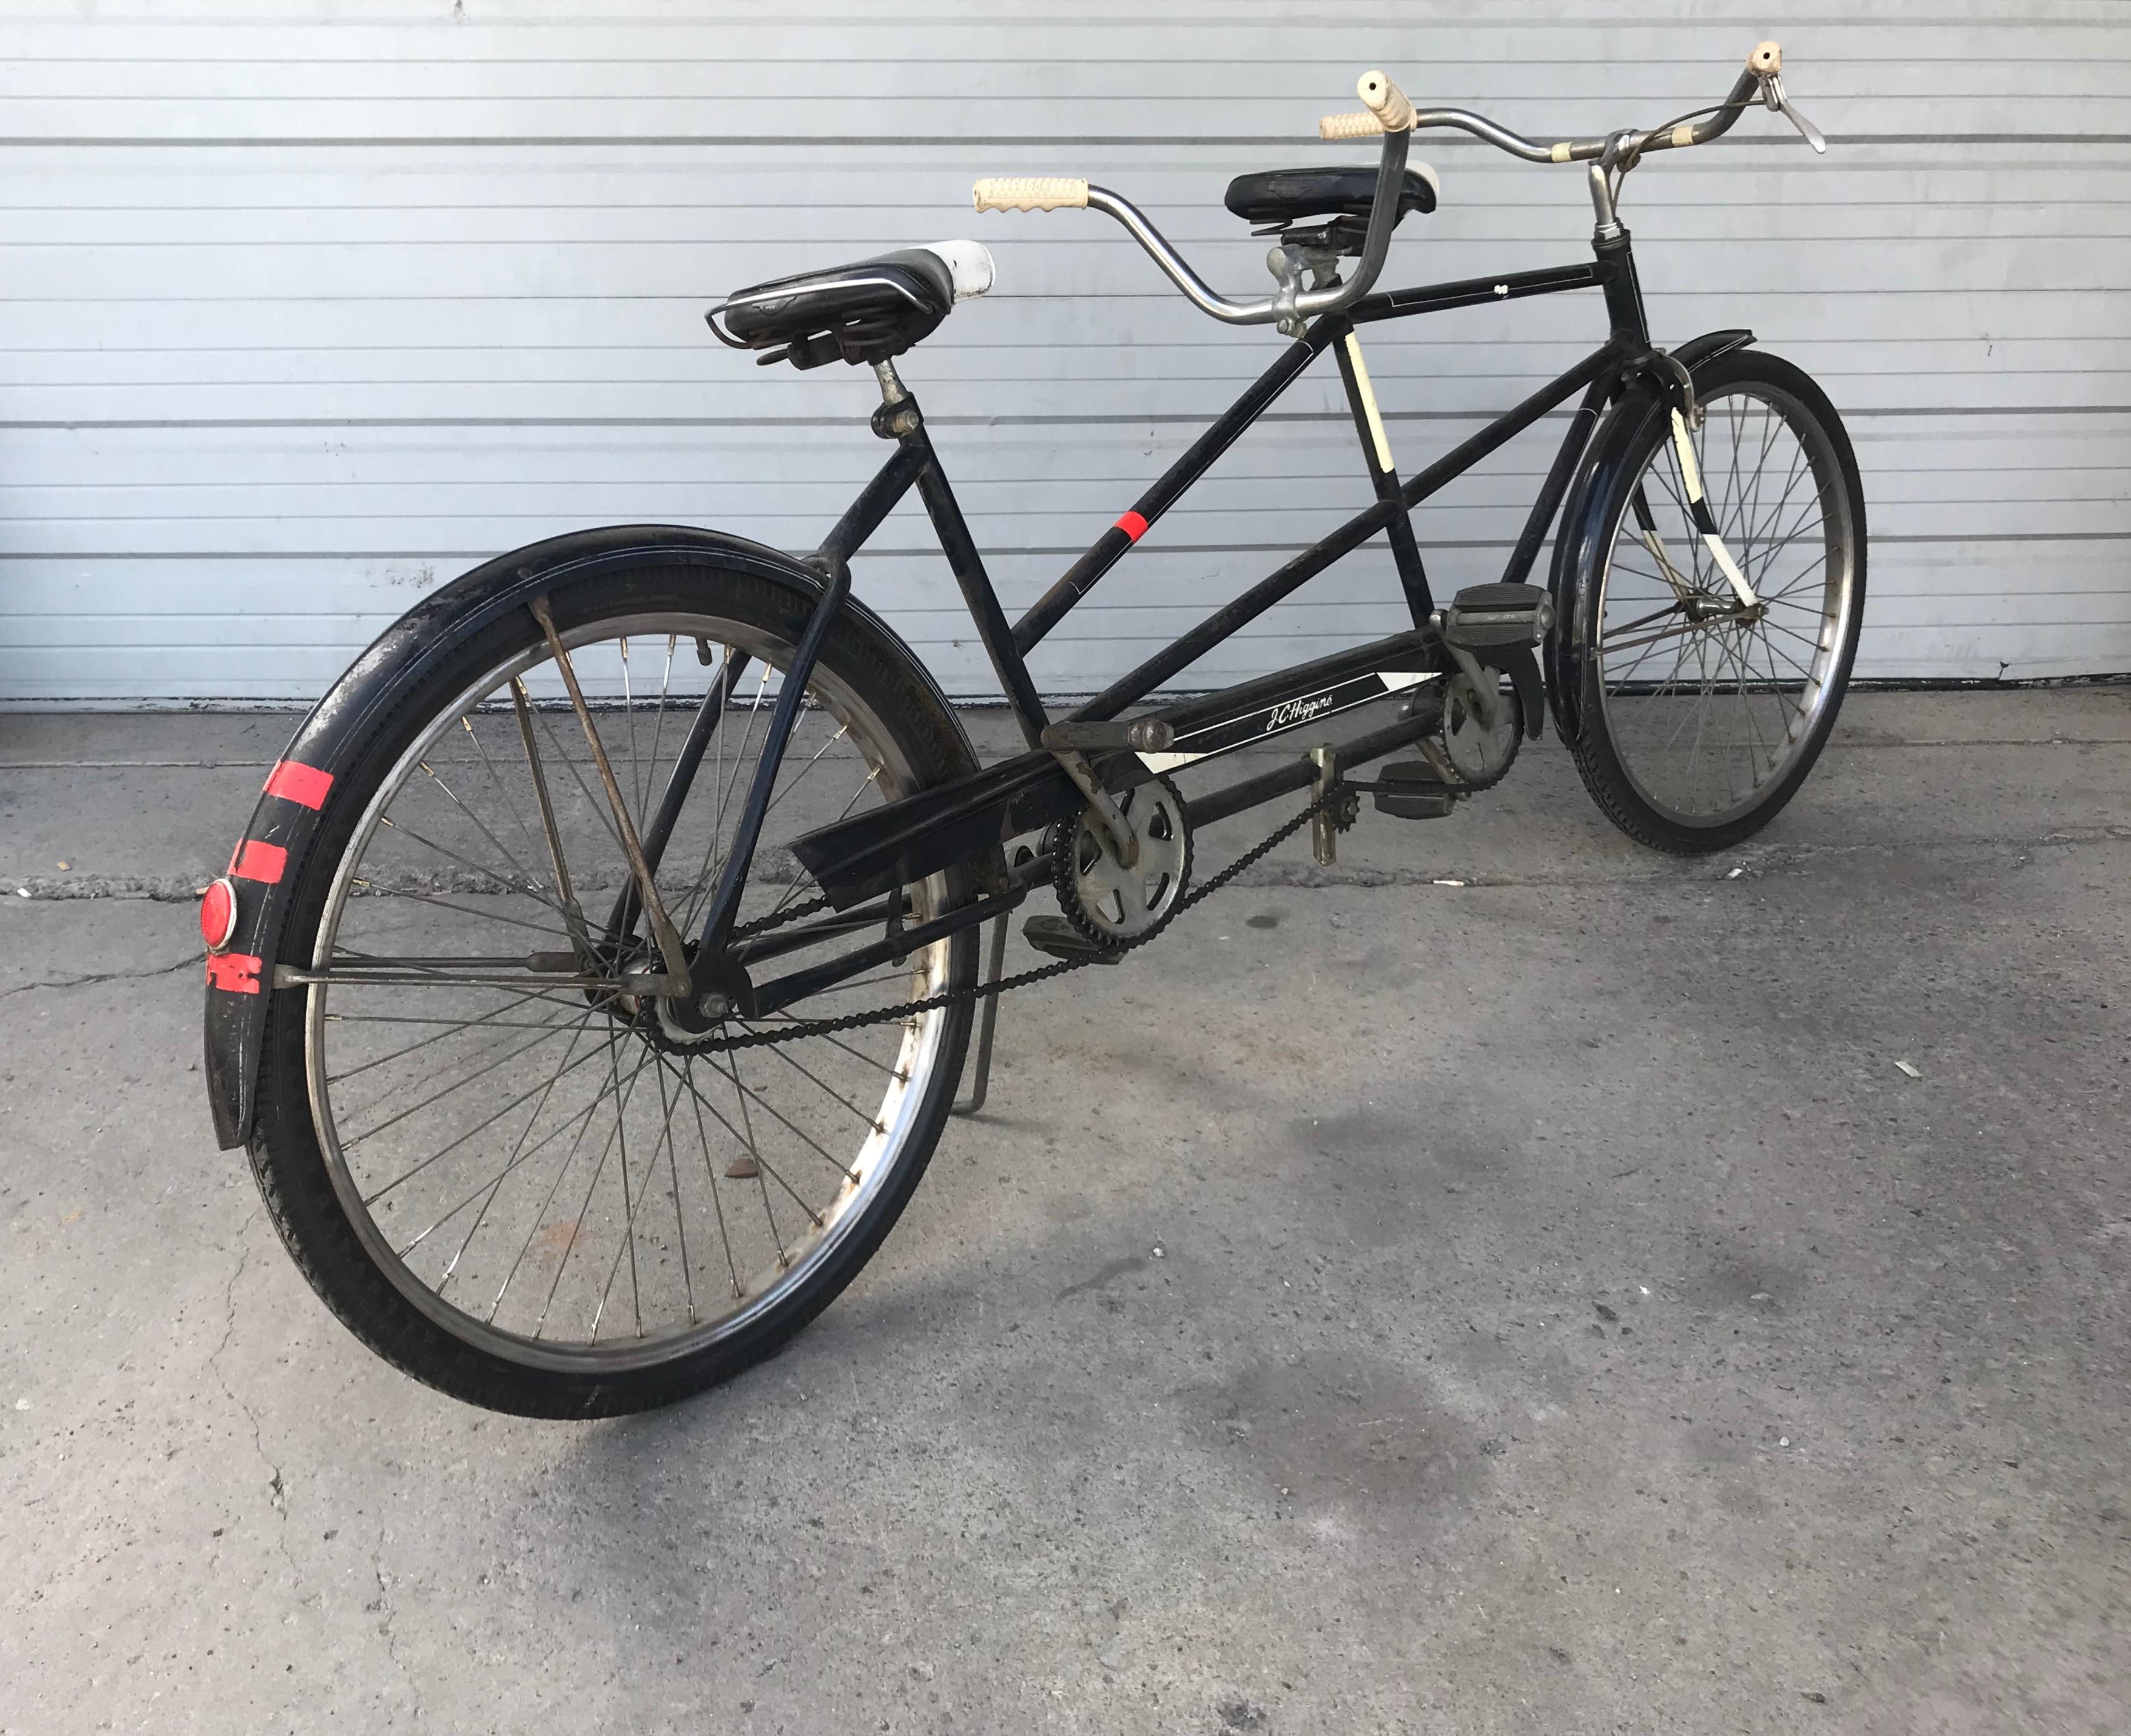 Mid-Century Modern Classic 1950s Tandem Bike, Bicycle Built for Two by J C Higgins